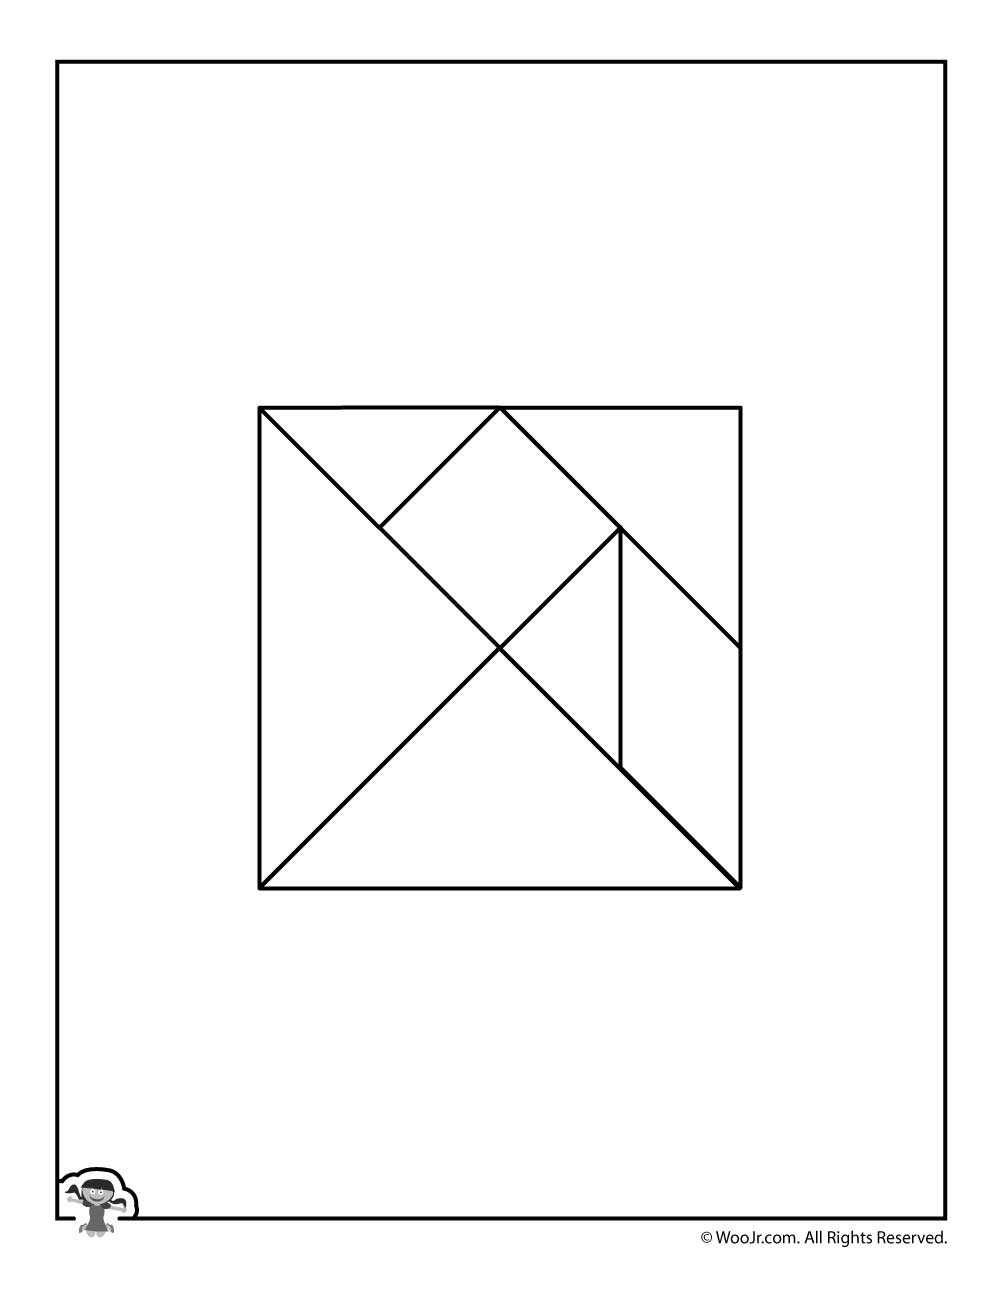 Color Your Own Printable Tangram Puzzle Pieces | Woo! Jr. Kids - Printable Tangram Puzzles